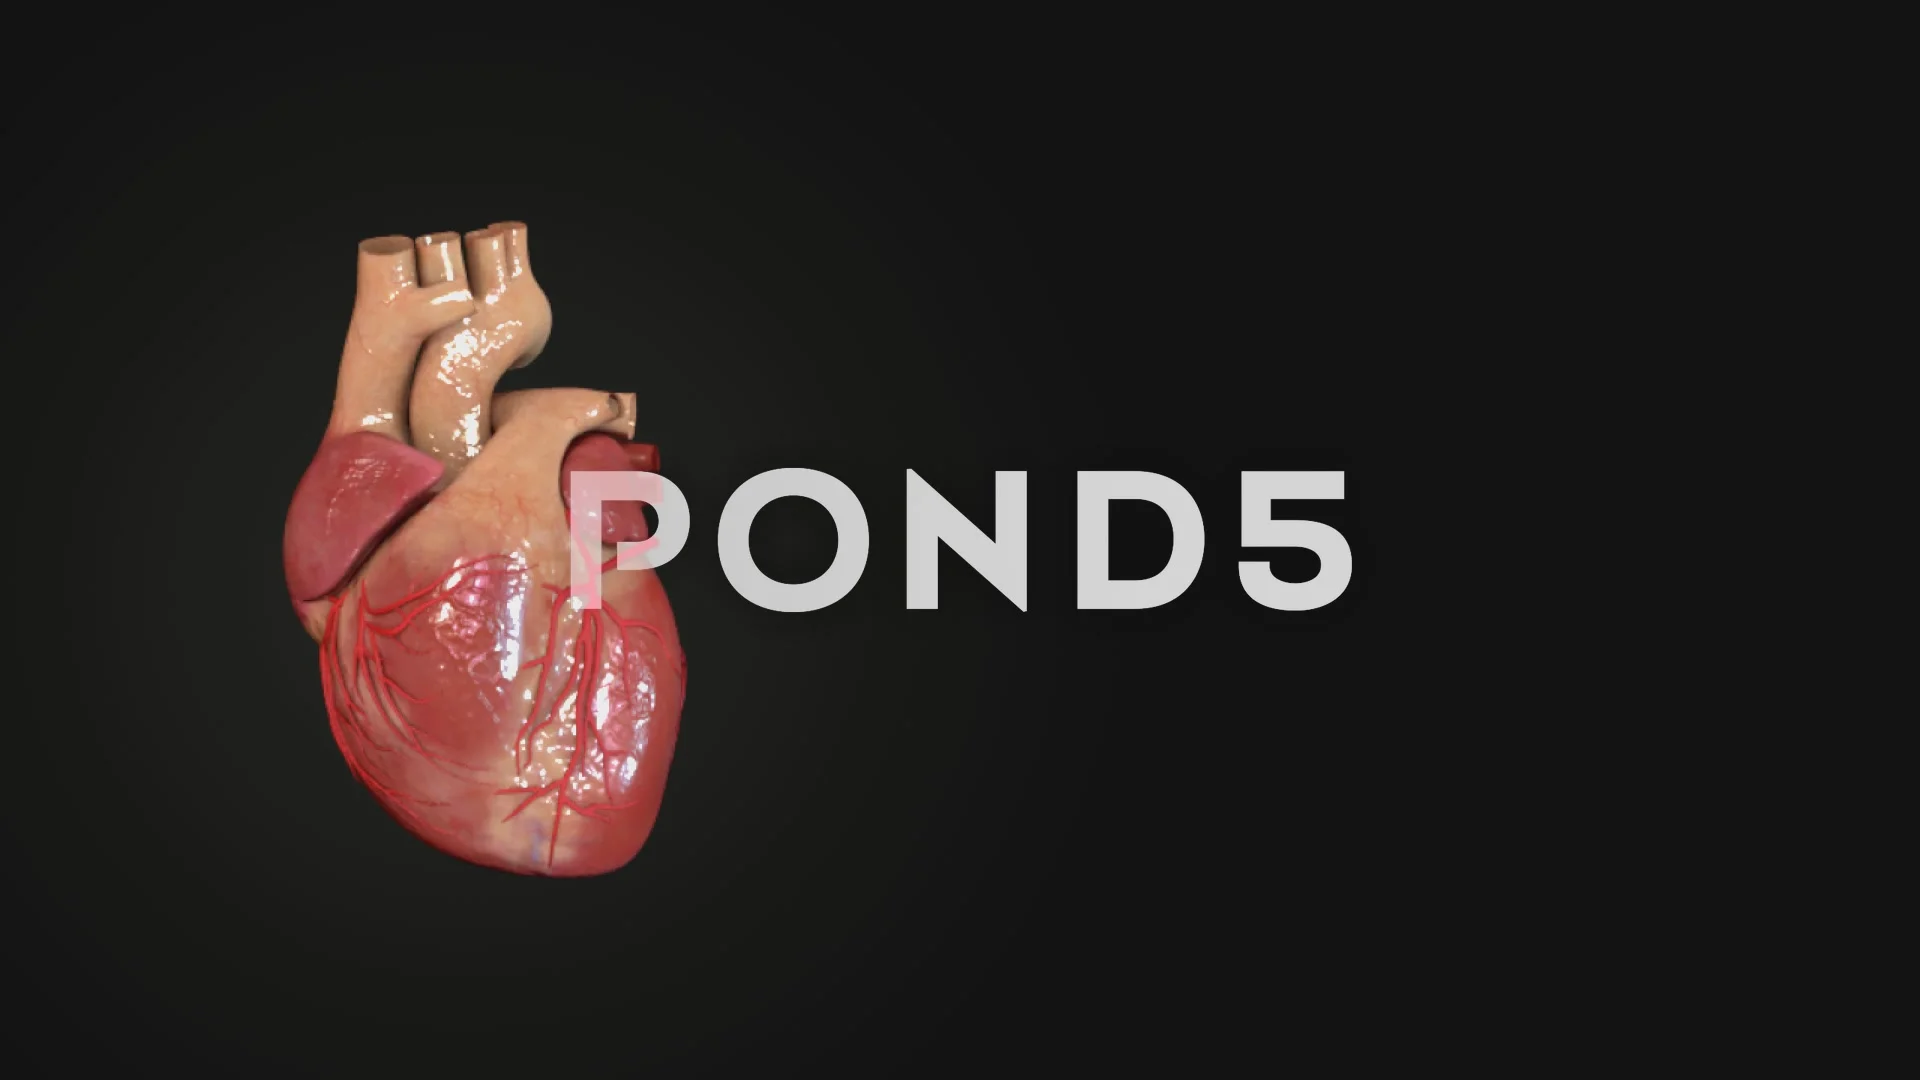 HUMAN HEART 3D animation | Stock Video | Pond5